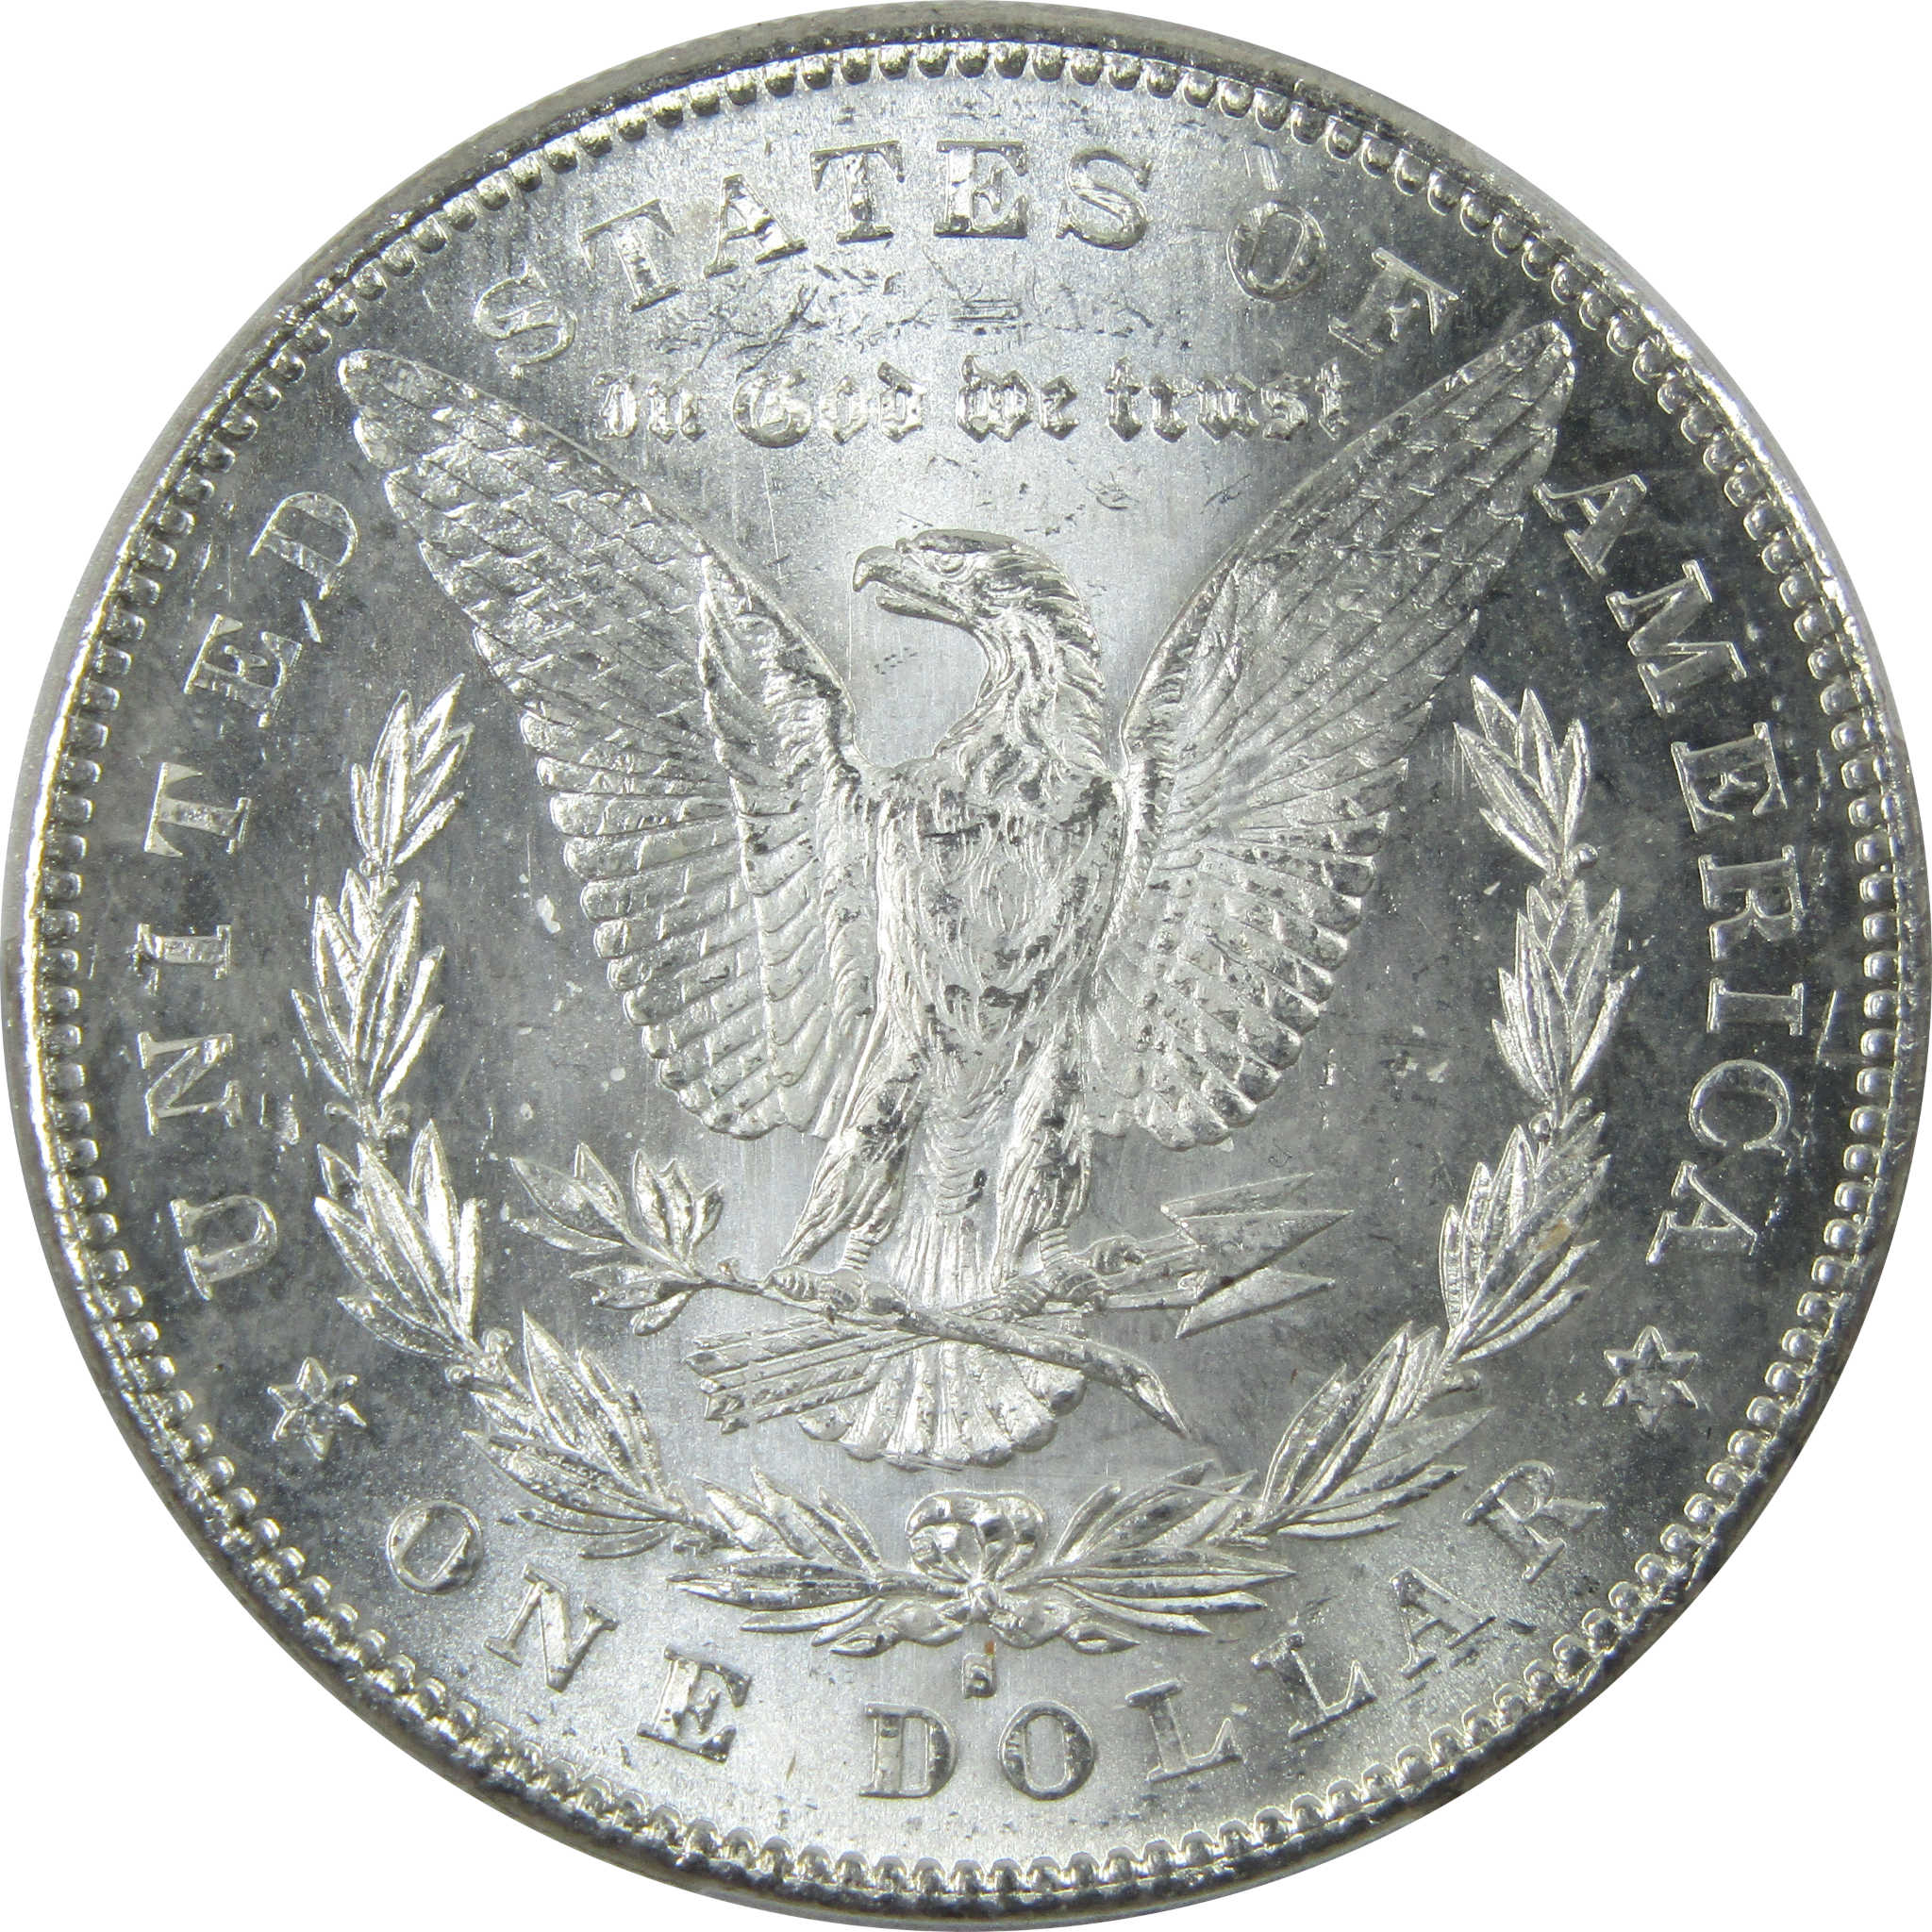 1878 S Morgan Dollar MS 63 PCGS Silver $1 Uncirculated Coin SKU:I13917 - Morgan coin - Morgan silver dollar - Morgan silver dollar for sale - Profile Coins &amp; Collectibles